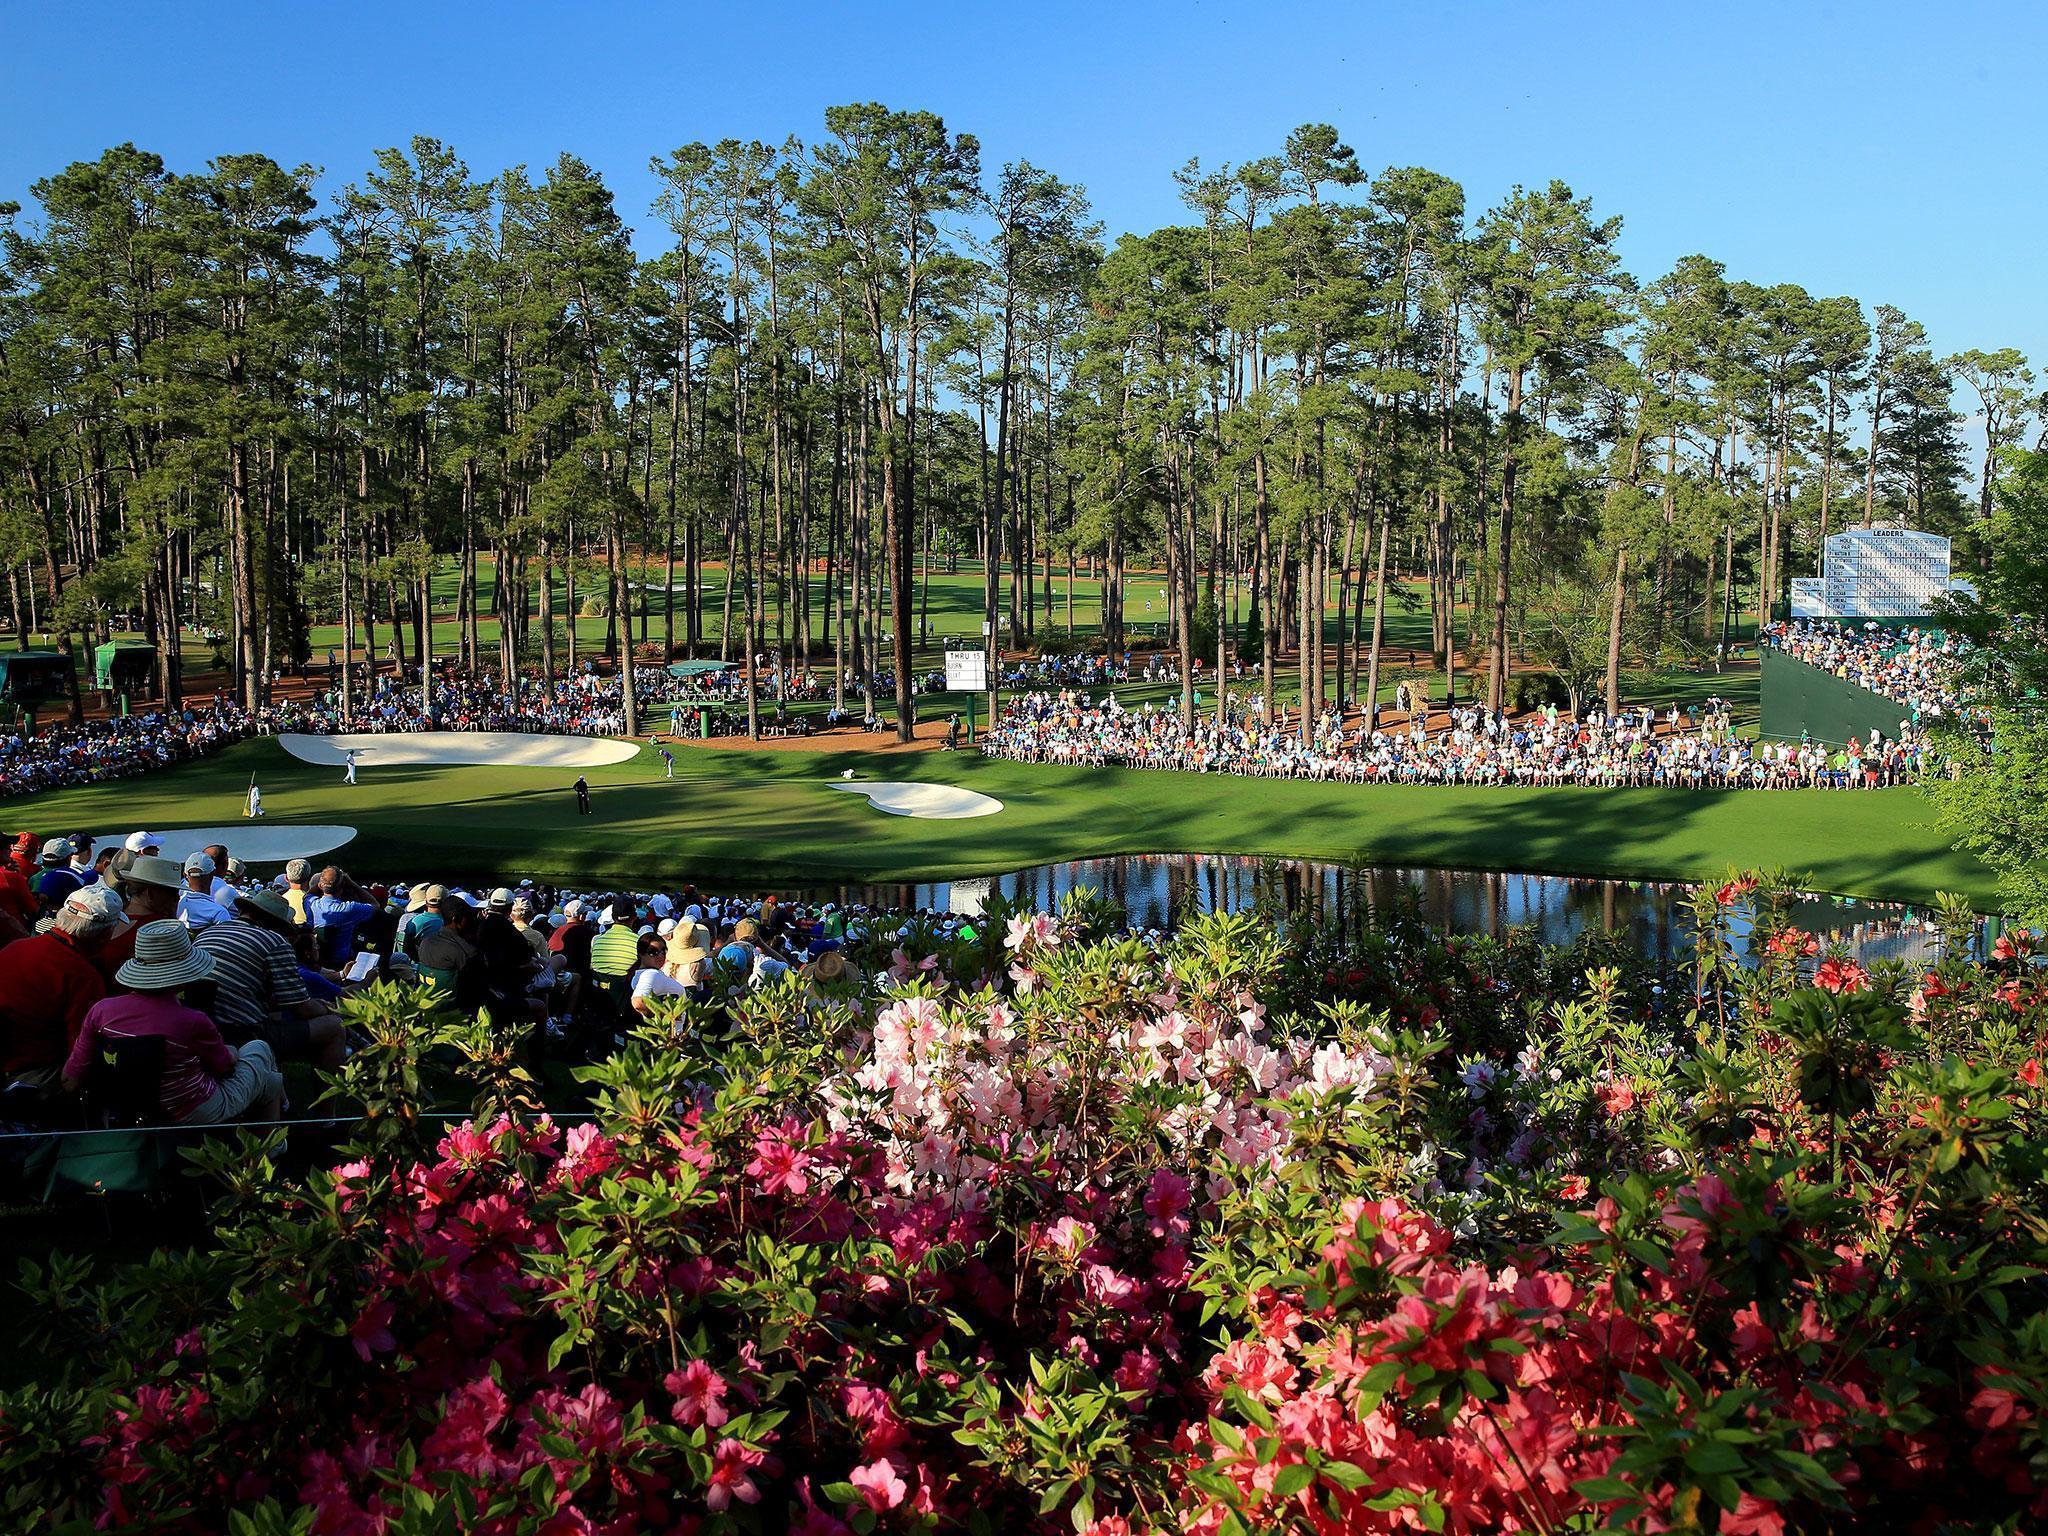 The entire course is covered in flowering plants